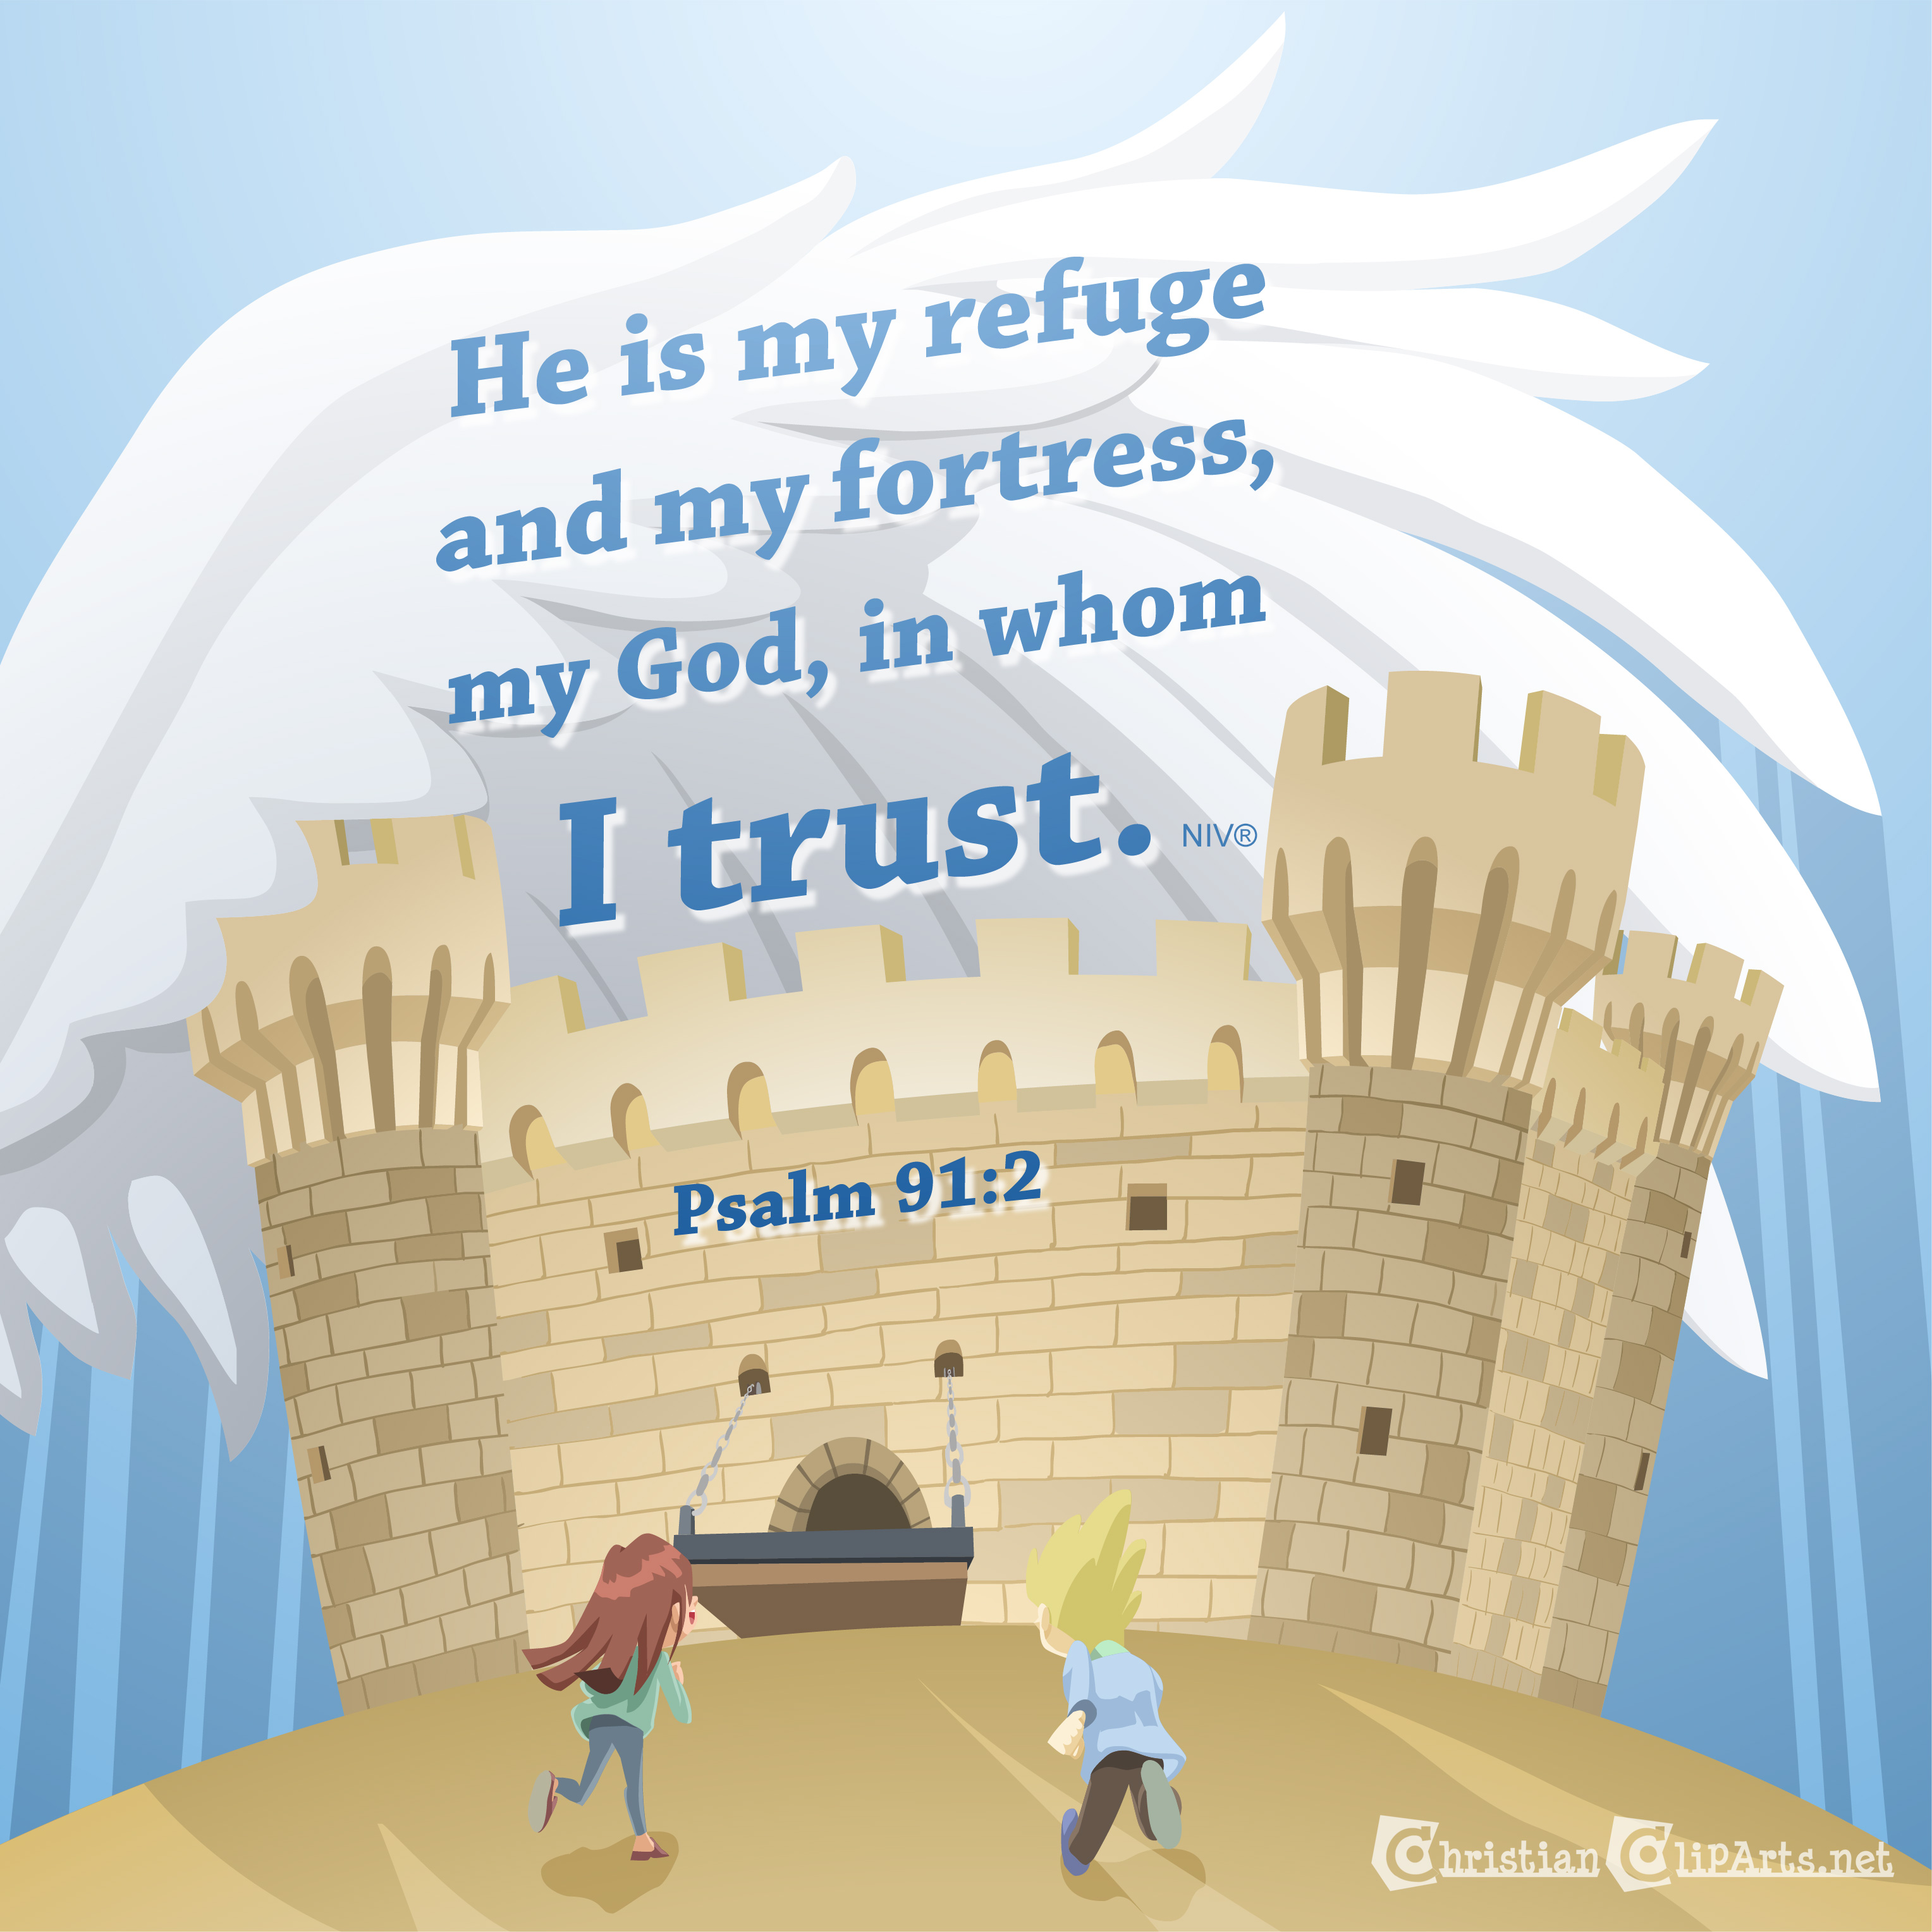 The Lord is my refuge